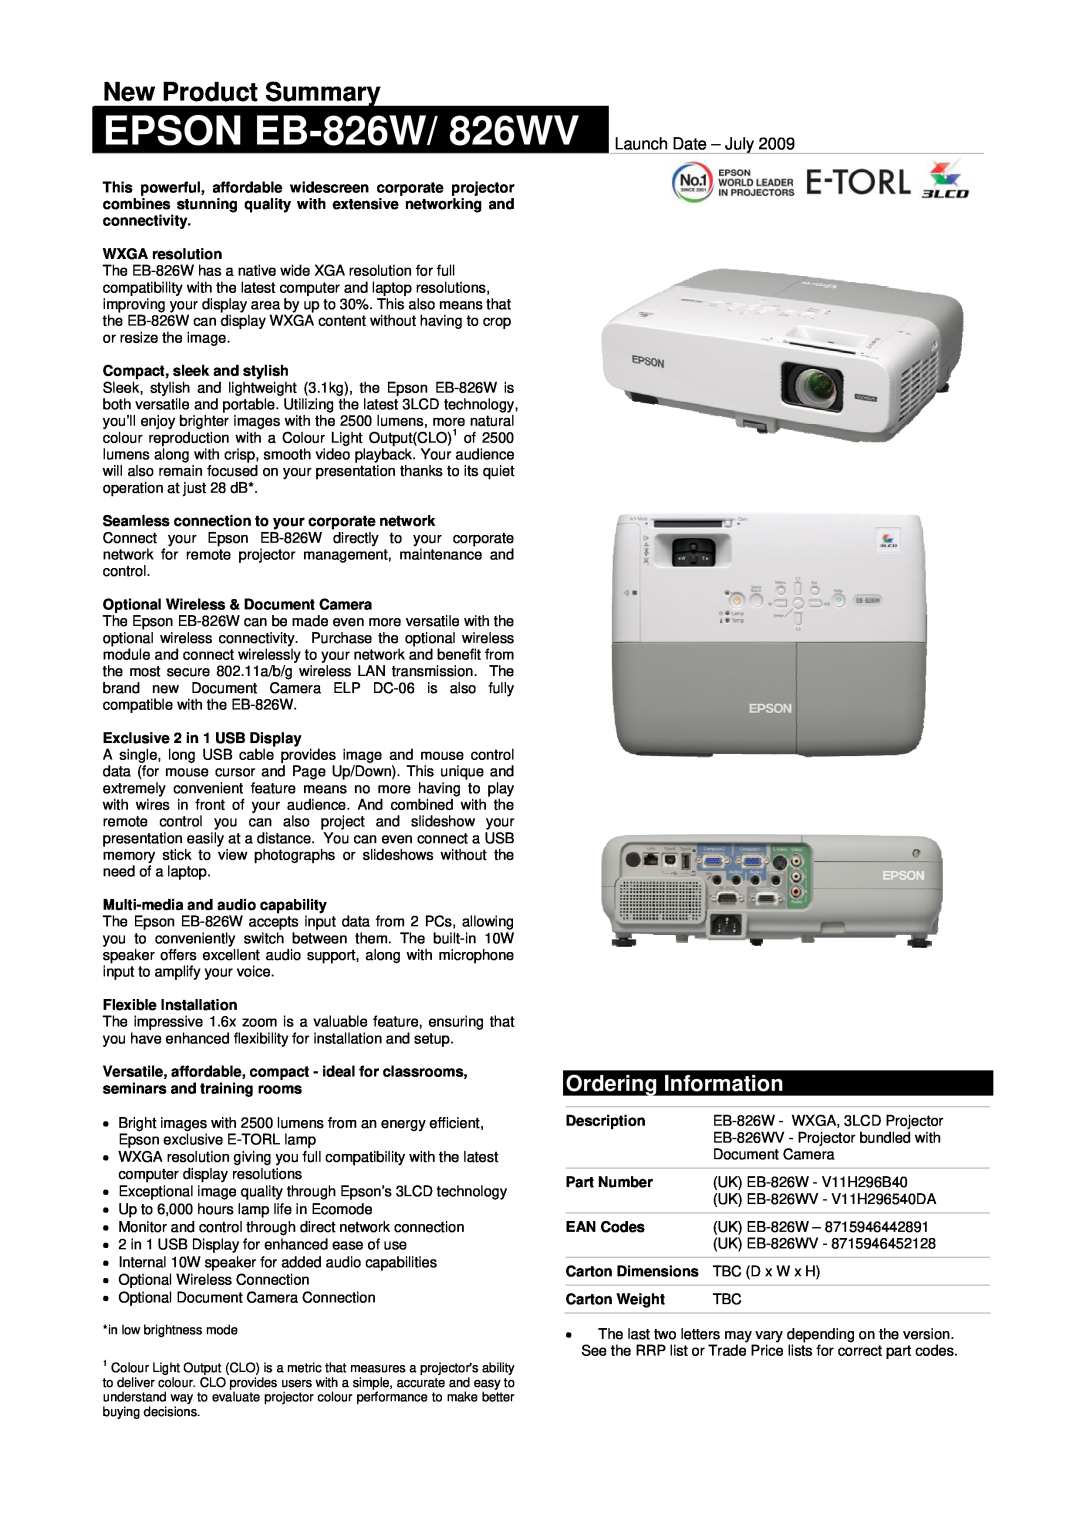 Epson EB-826WV dimensions Ordering Information, New Product Summary, EPSON EB-826W/826WV Launch Date - July 